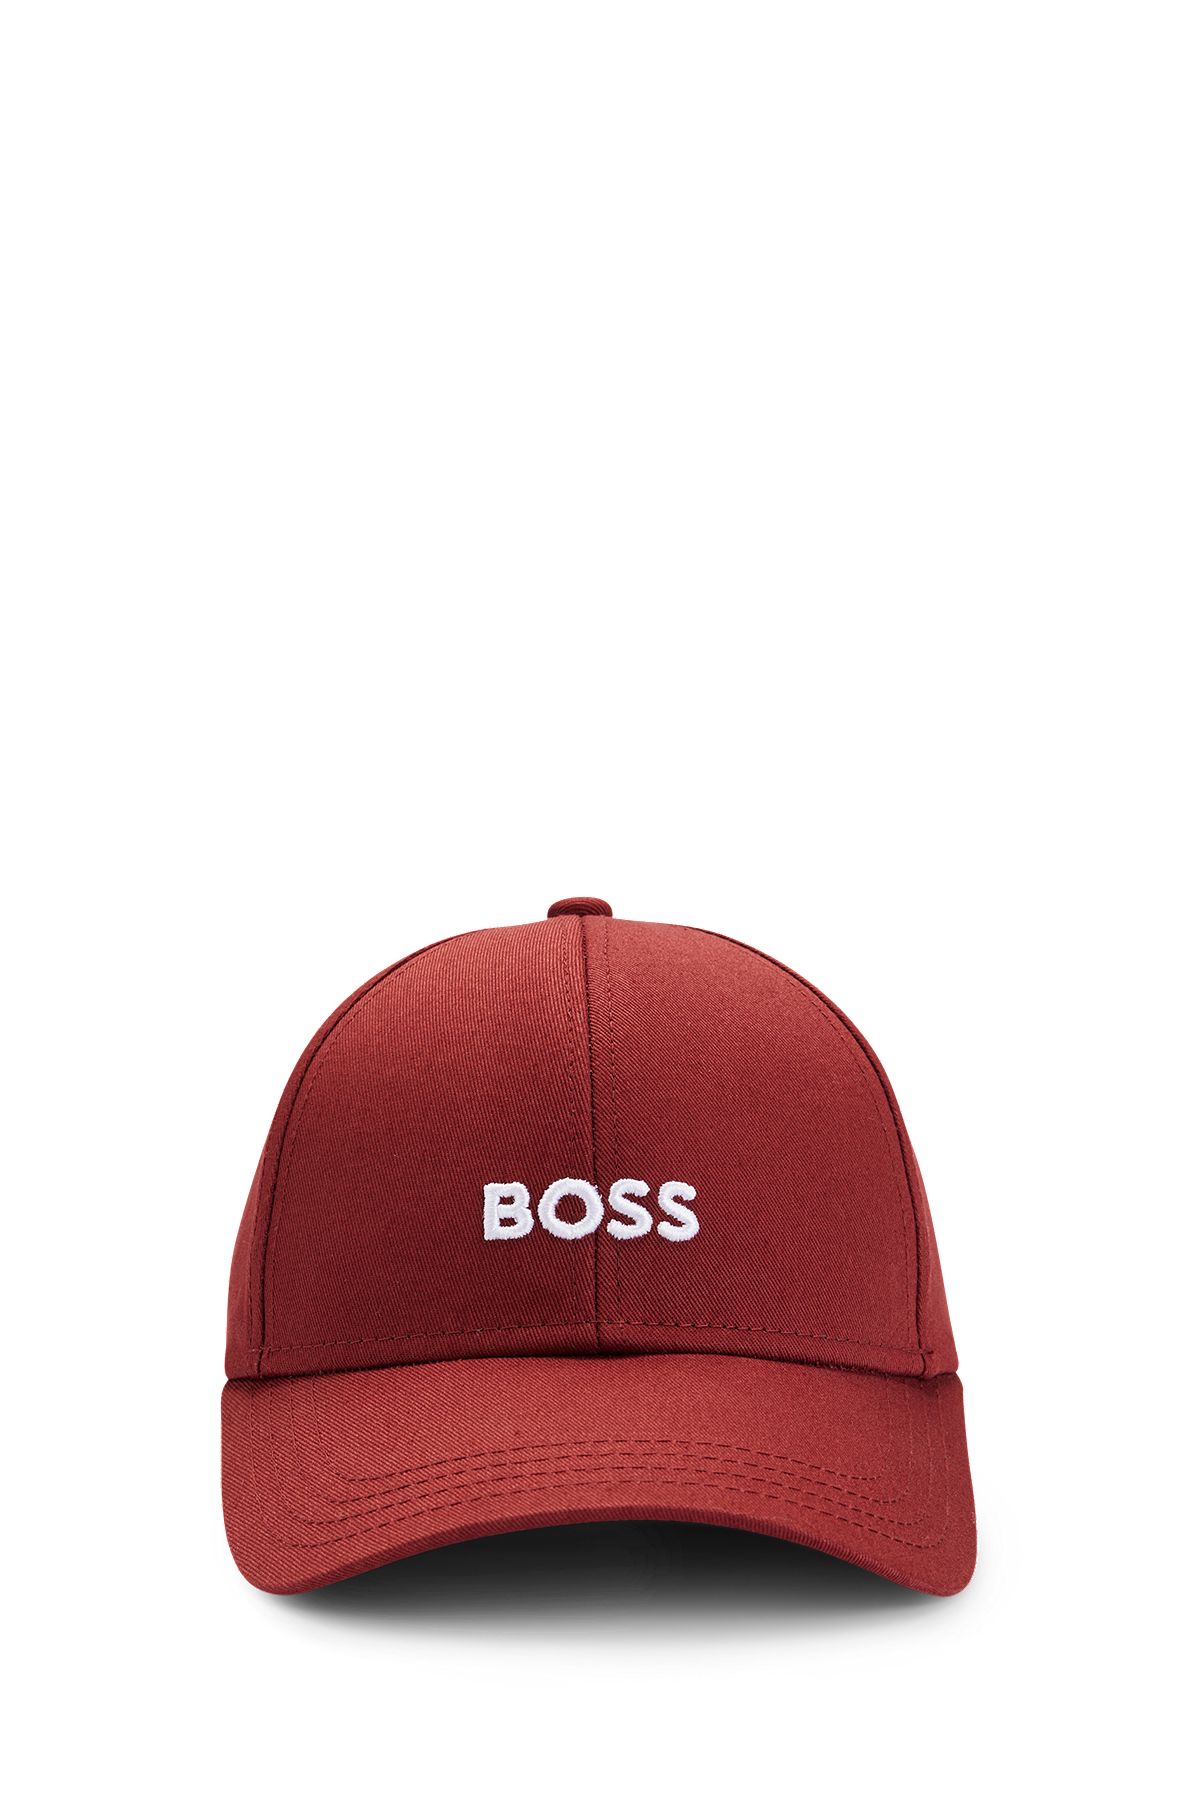 BOSS® Hats, Gloves HUGO Scarves Clothing | and Accessories Men\'s Men\'s